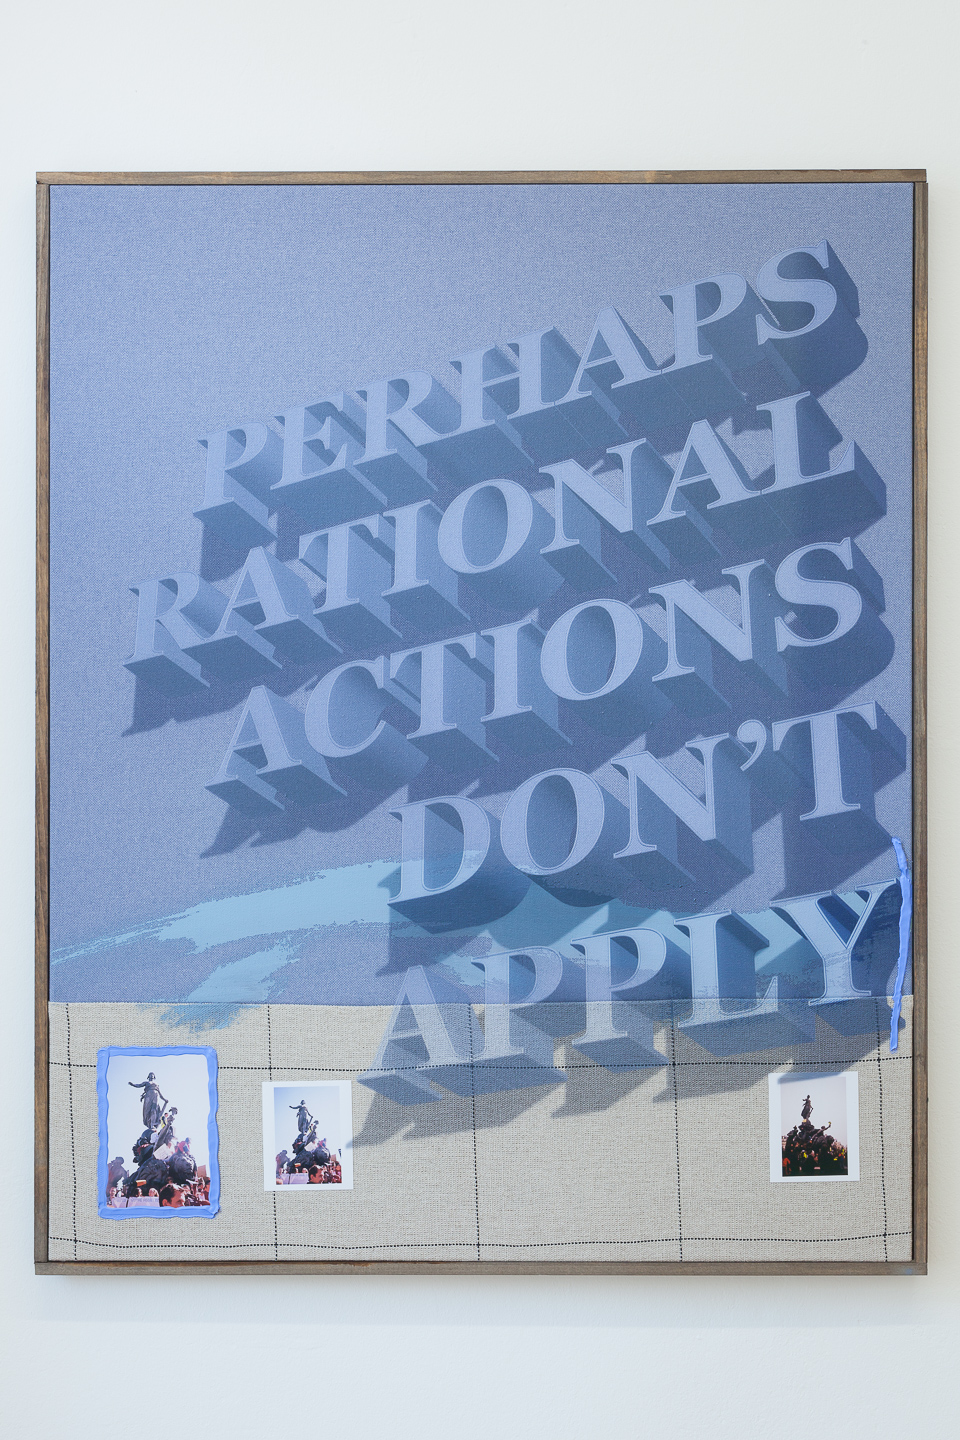 Philipp TimischlPerhaps Rational Actions Don‘t Apply, 2020,Acrylic paint, UV-Di- rect Print and photos on fabrics stained wooden frame, 100x80cm